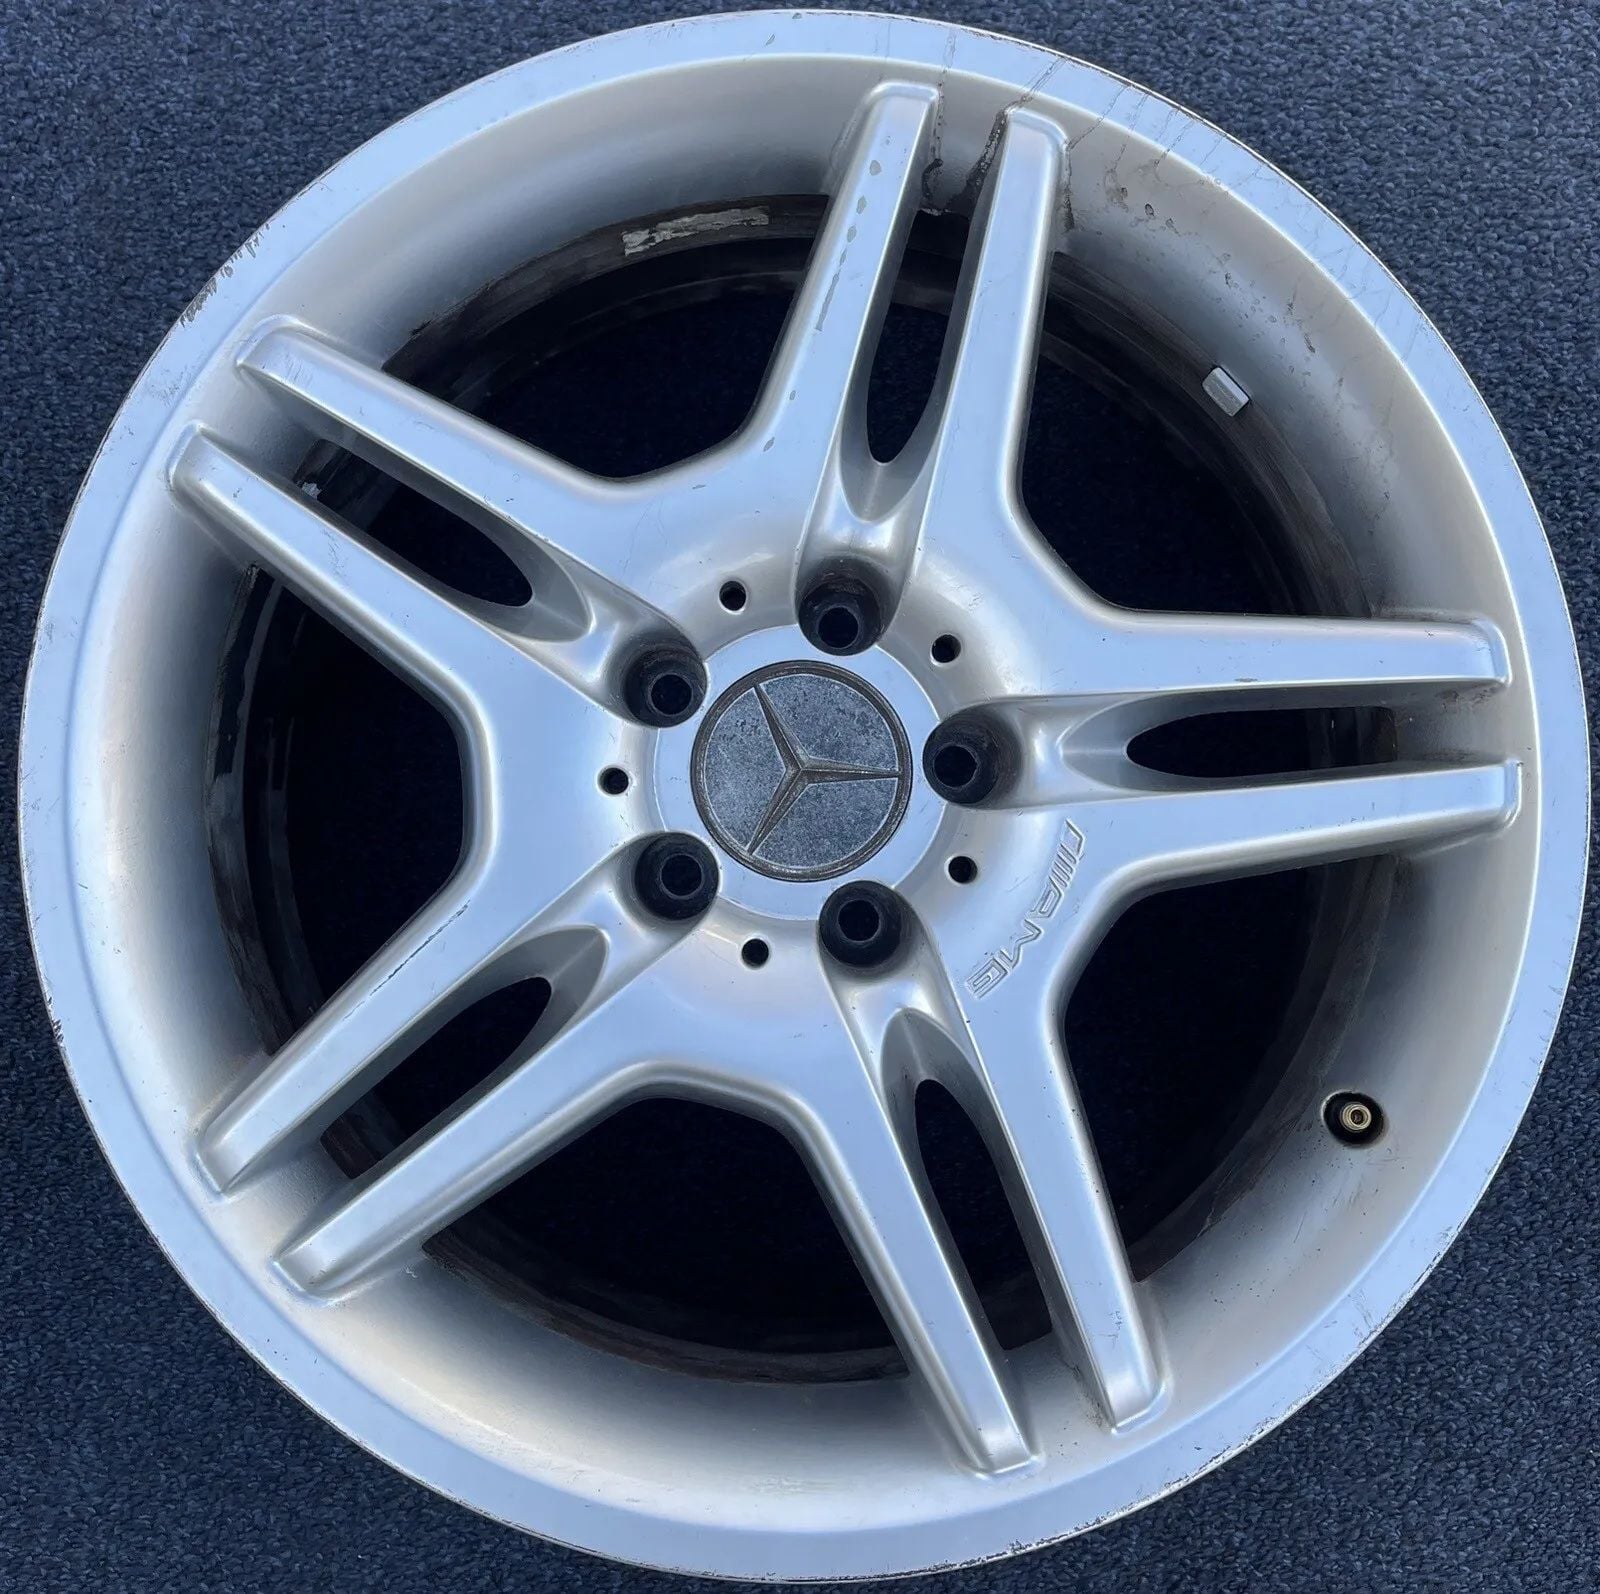 Wheels and Tires/Axles - WTB: 18" W211 E55 rims - New or Used - All Years  All Models - Washington, DC 20036, United States